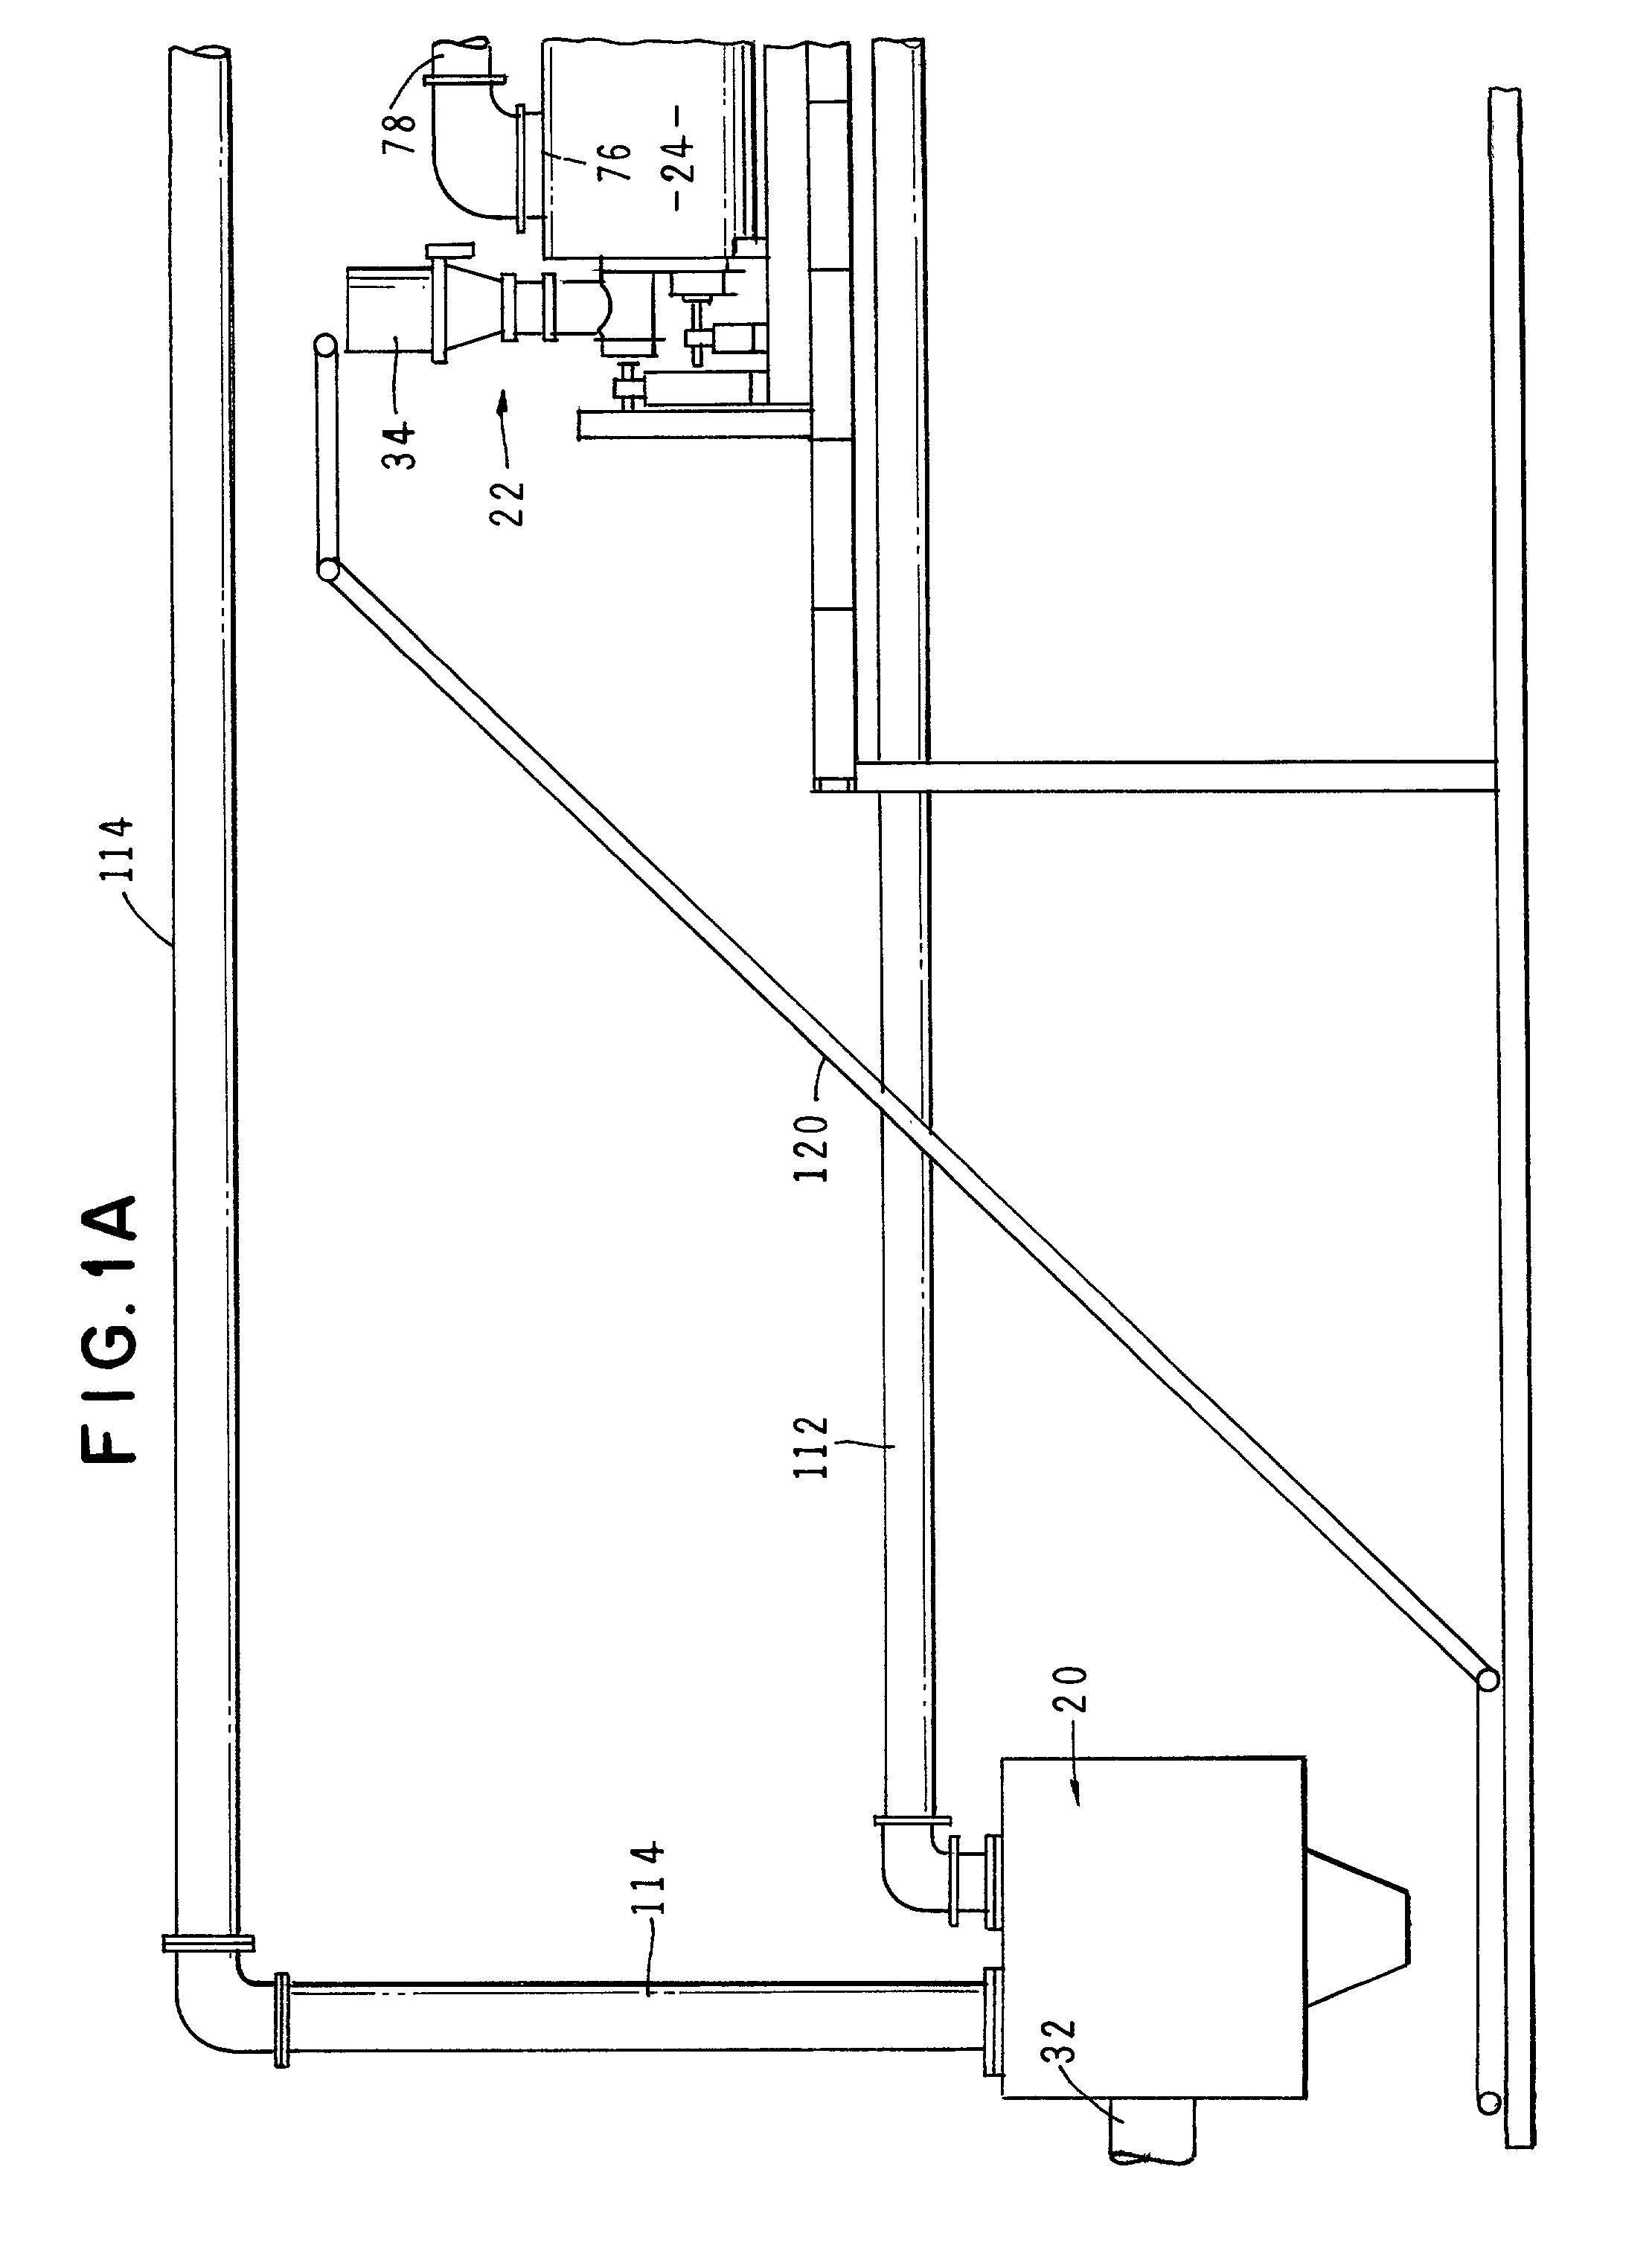 Method and apparatus for treatment of waste